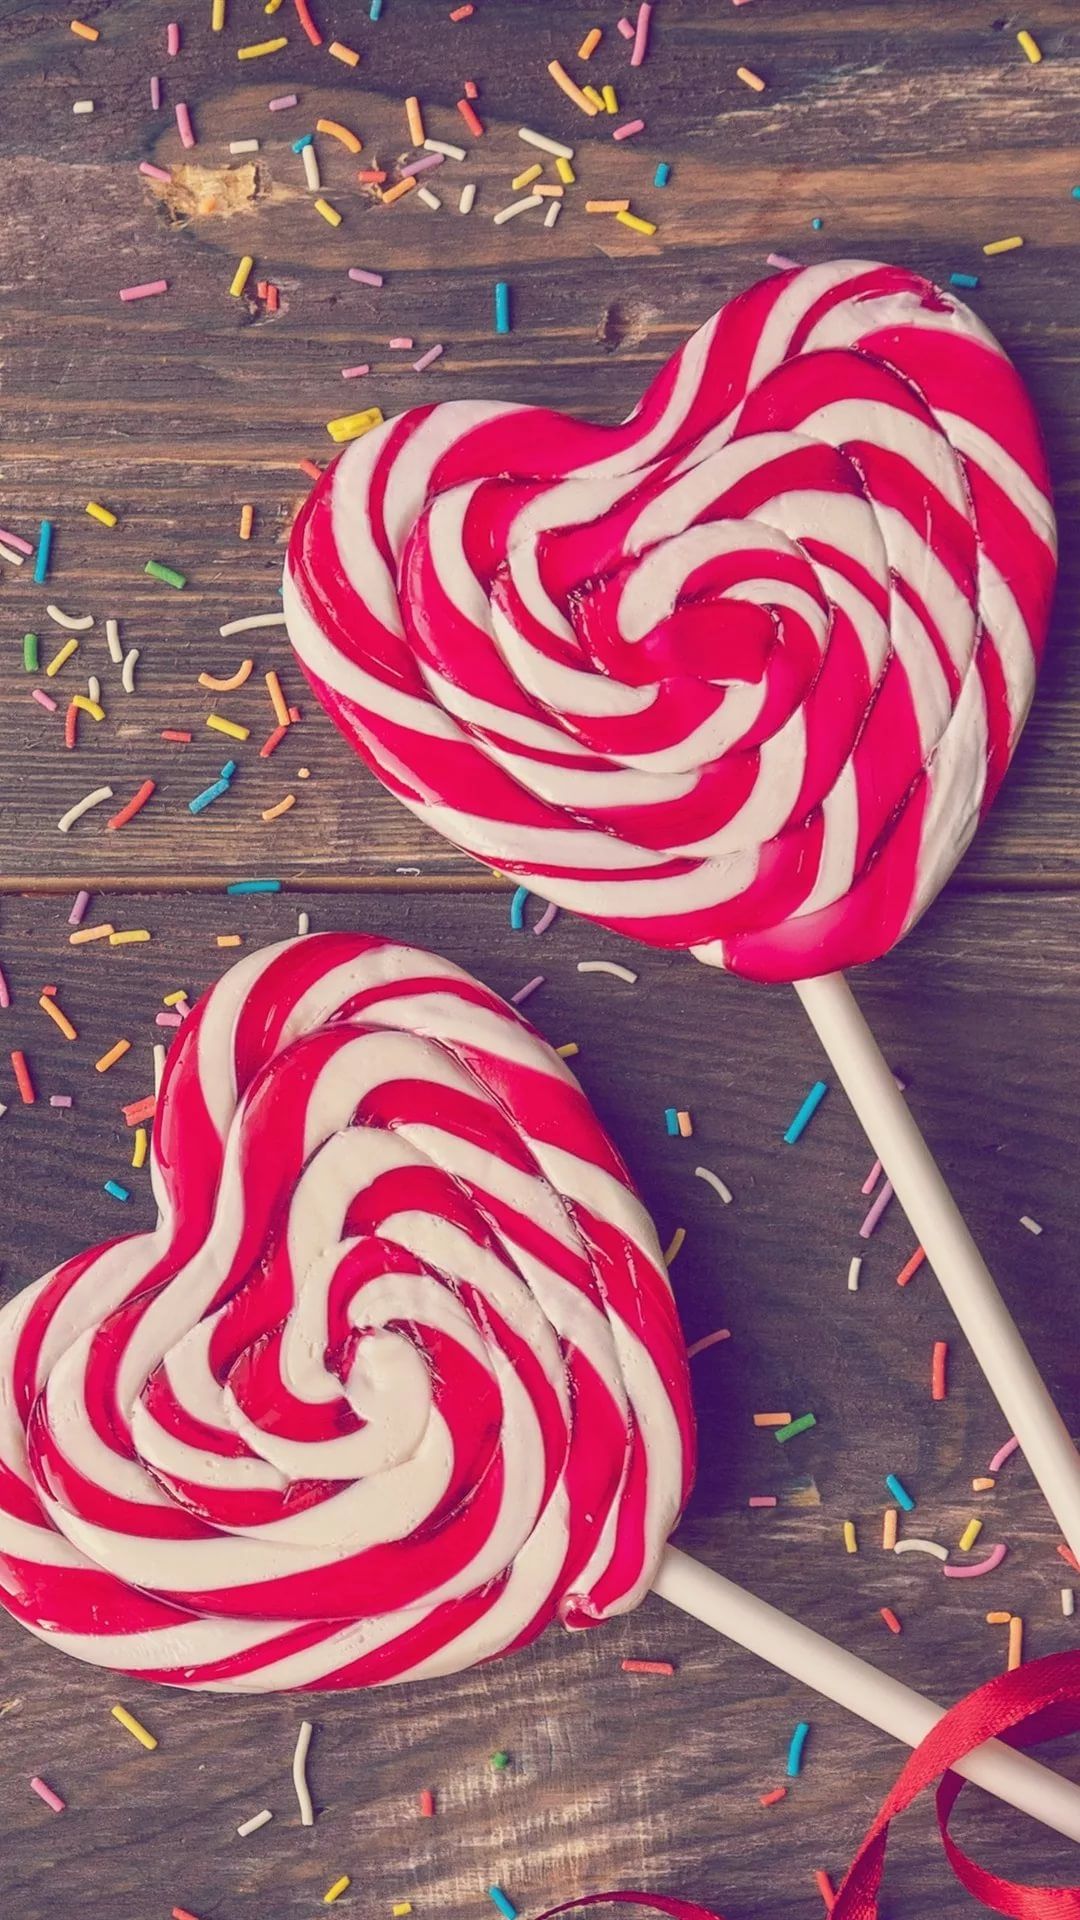 Candy iPhone 6 wallpaper